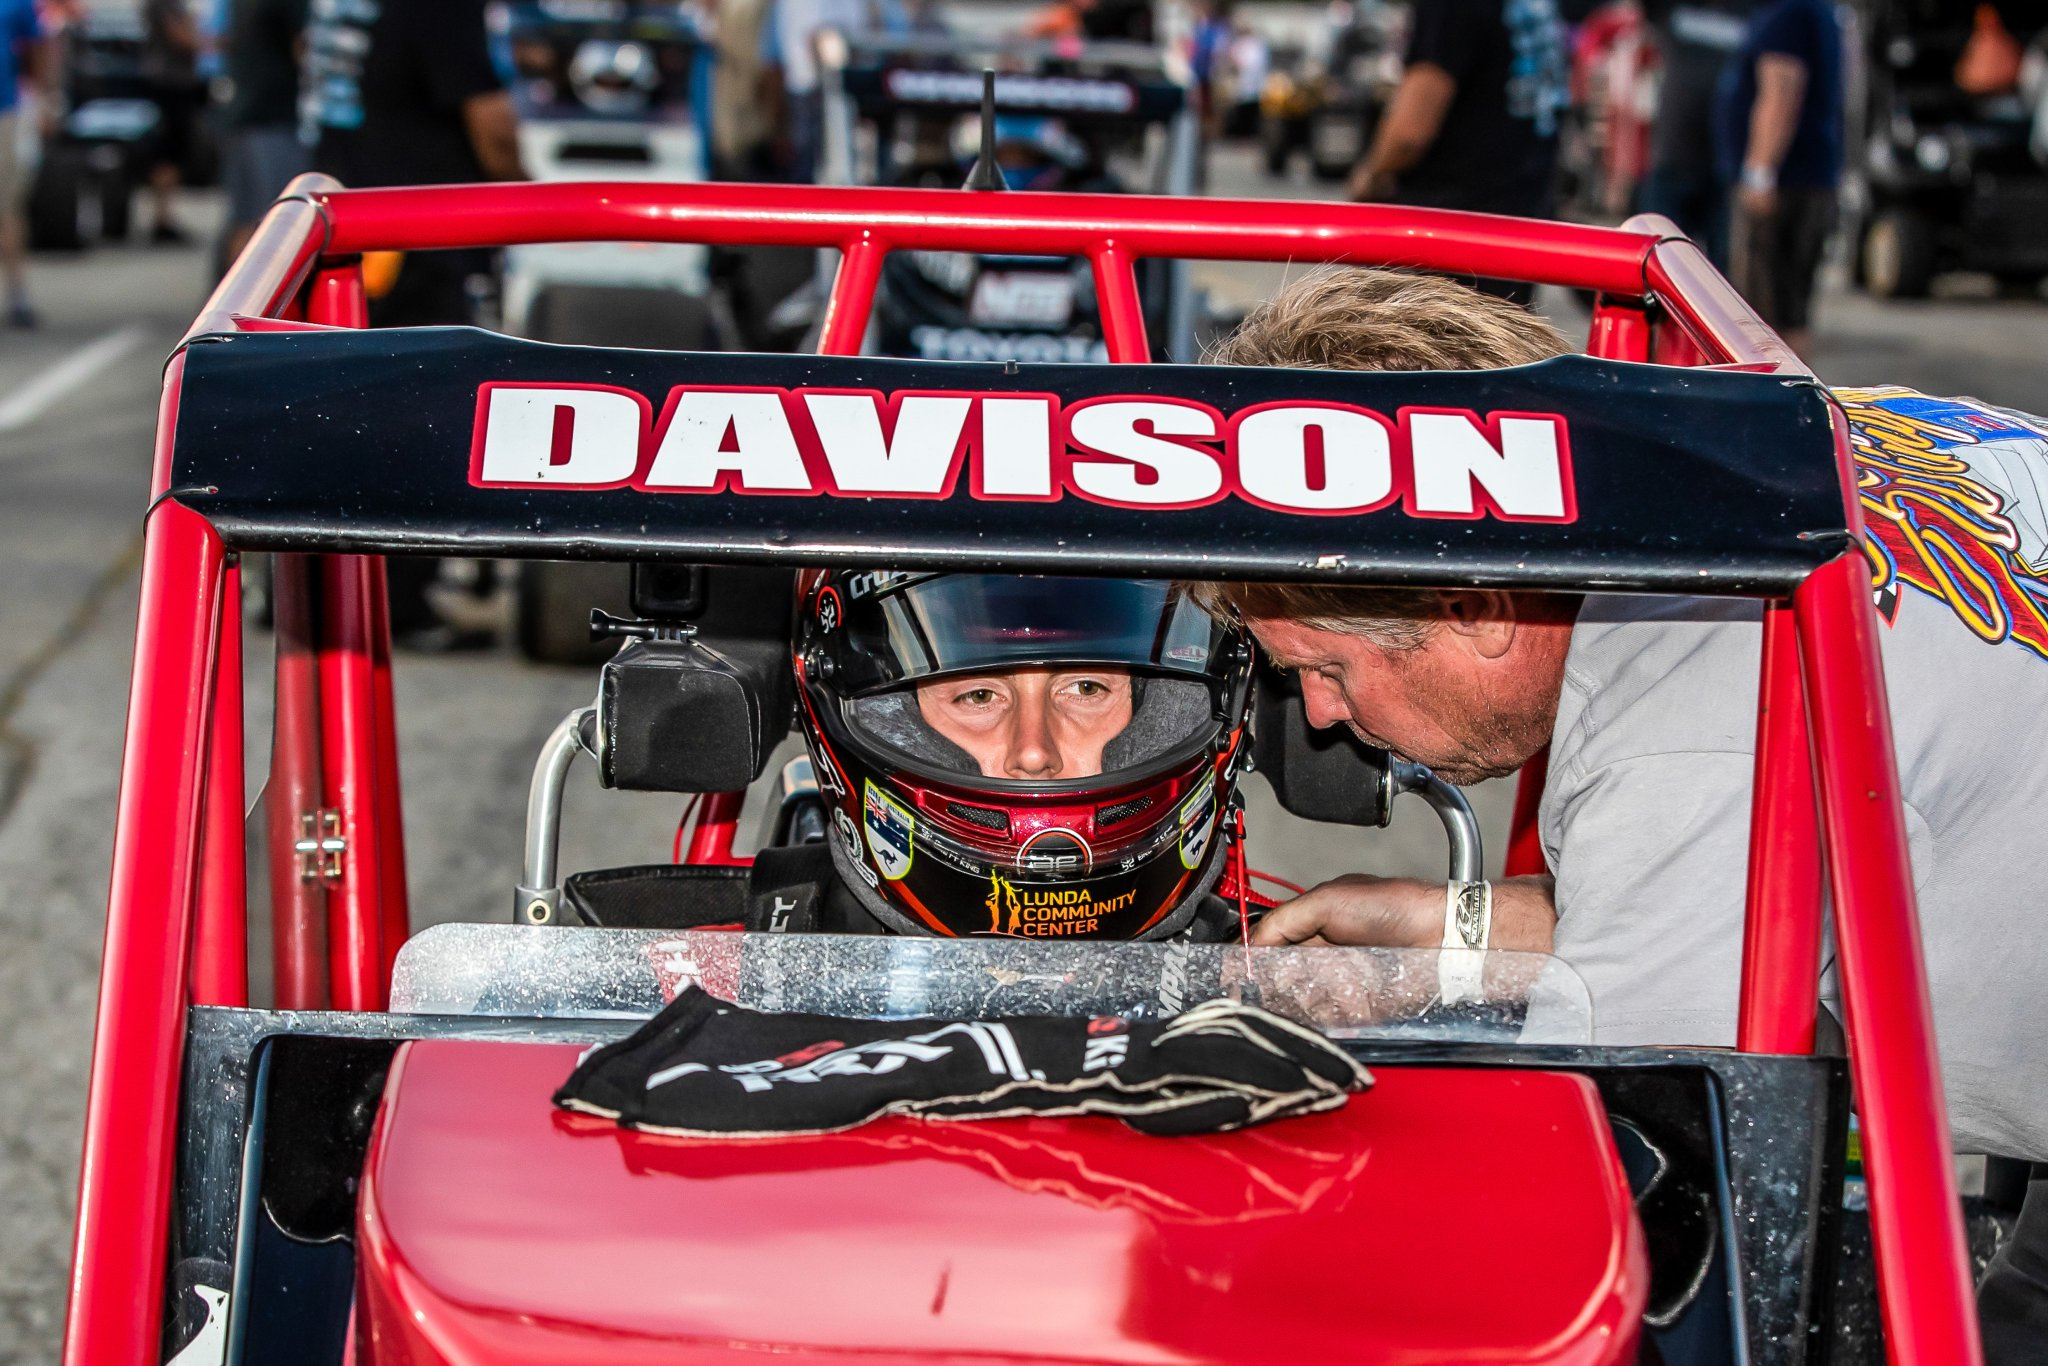 Indy 500 Davison Enters Niebel Classic - Anderson, Indiana Speedway - Home to the World's Fastest High-Banked Mile Oval!